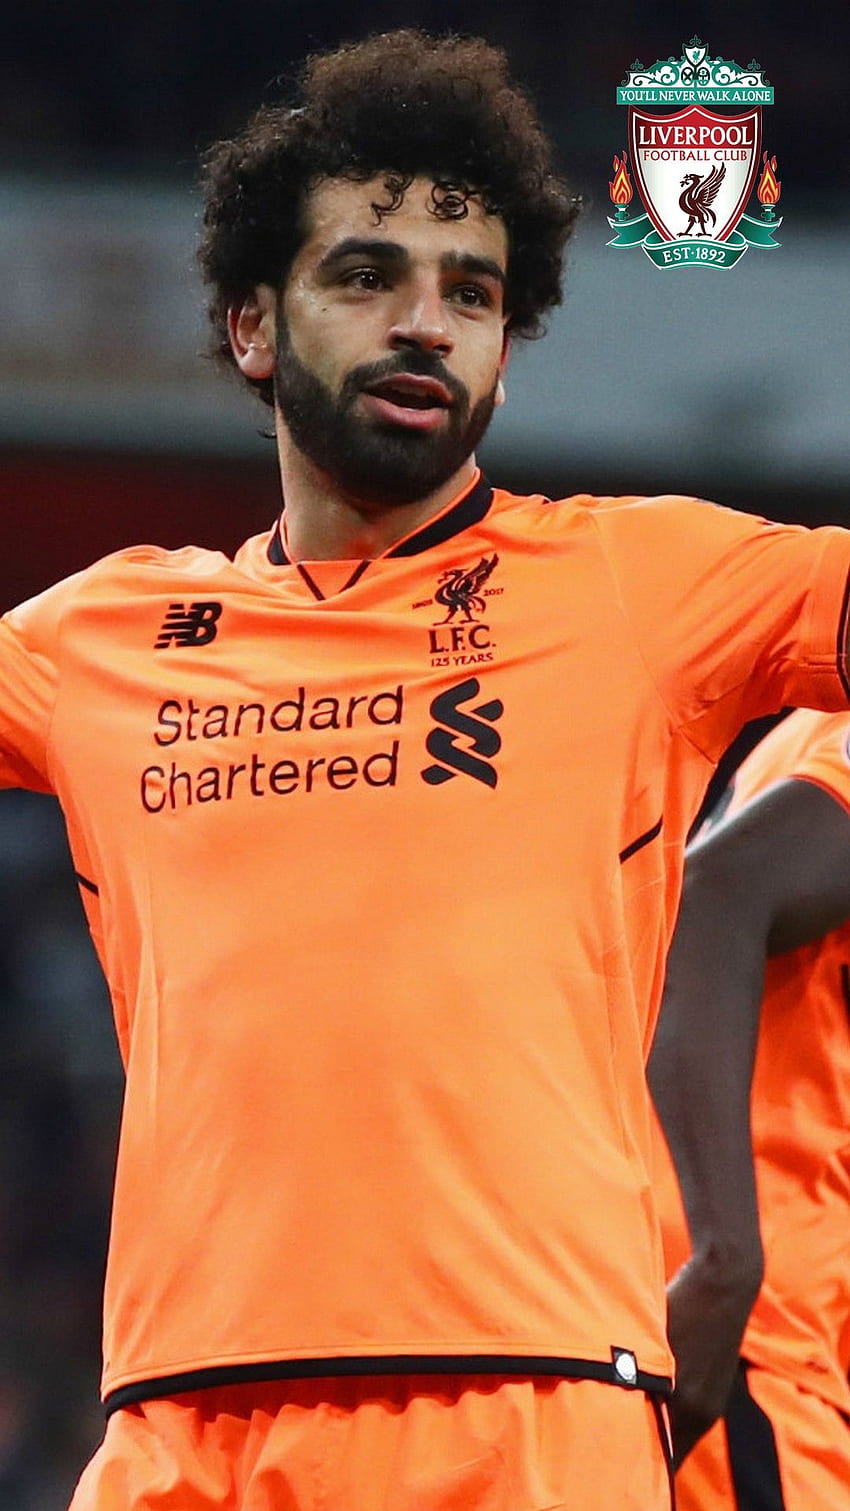 Liverpool Mohamed Salah Android - 2019 Android HD phone wallpaper